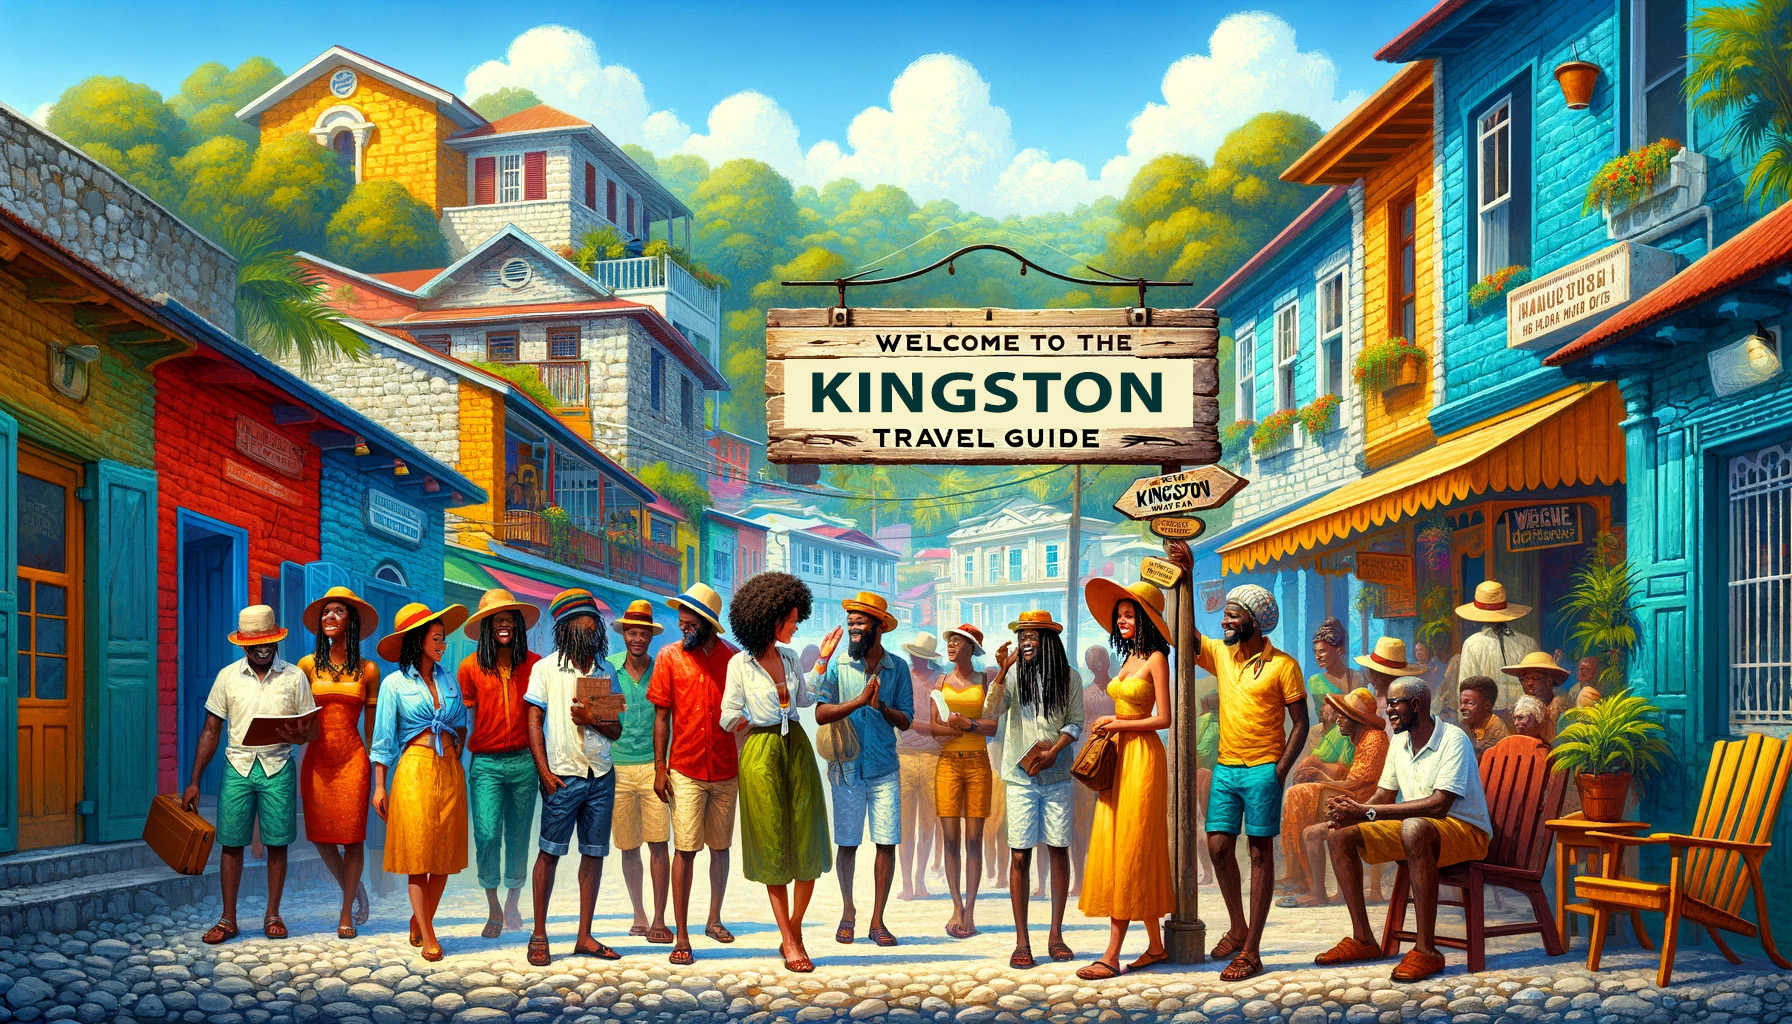 Welcome to the Kingston Travel Guide